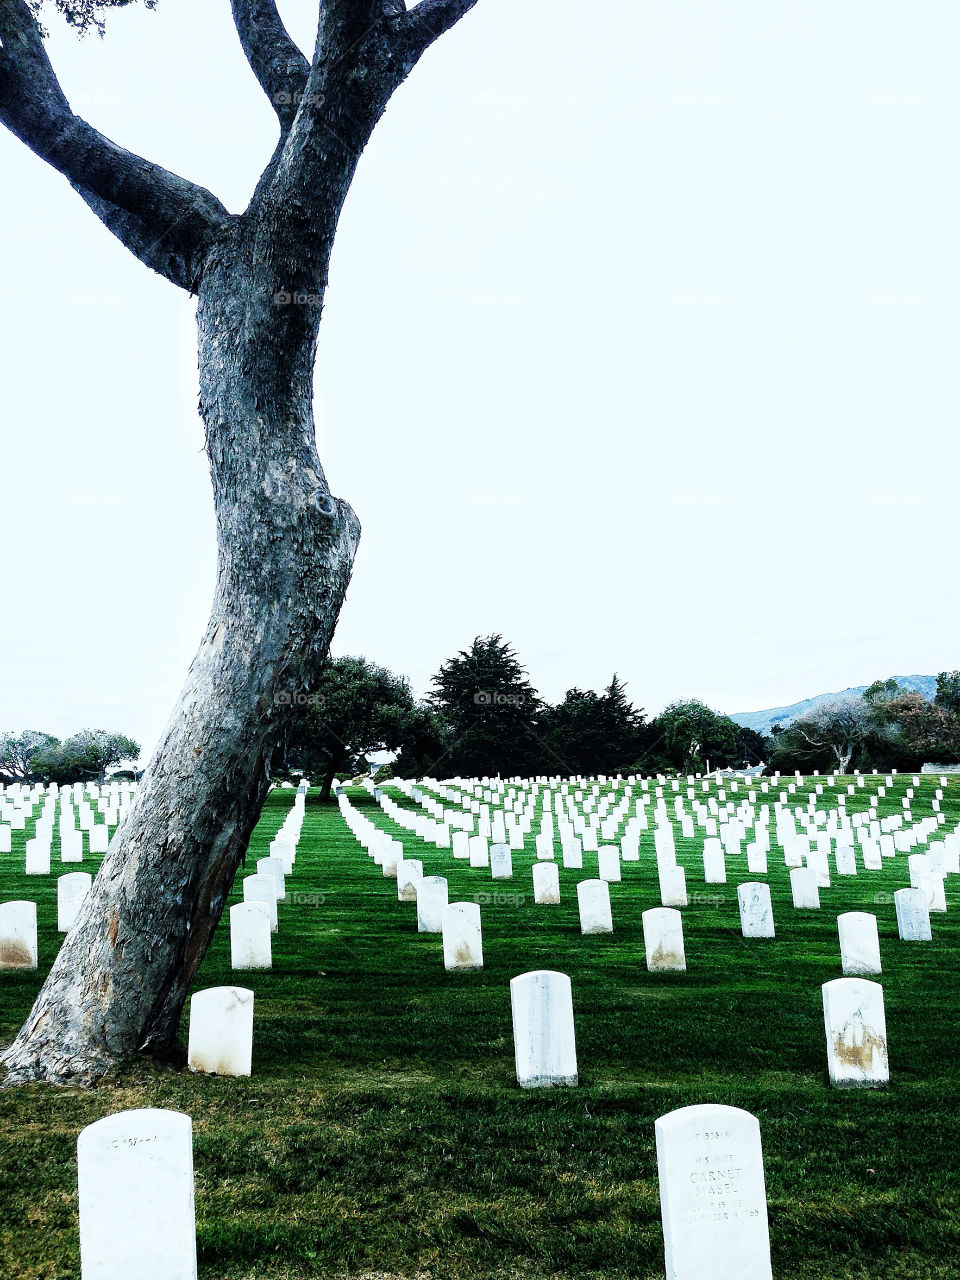 Rows of grave stones at an American military grave yard, Golden Gate